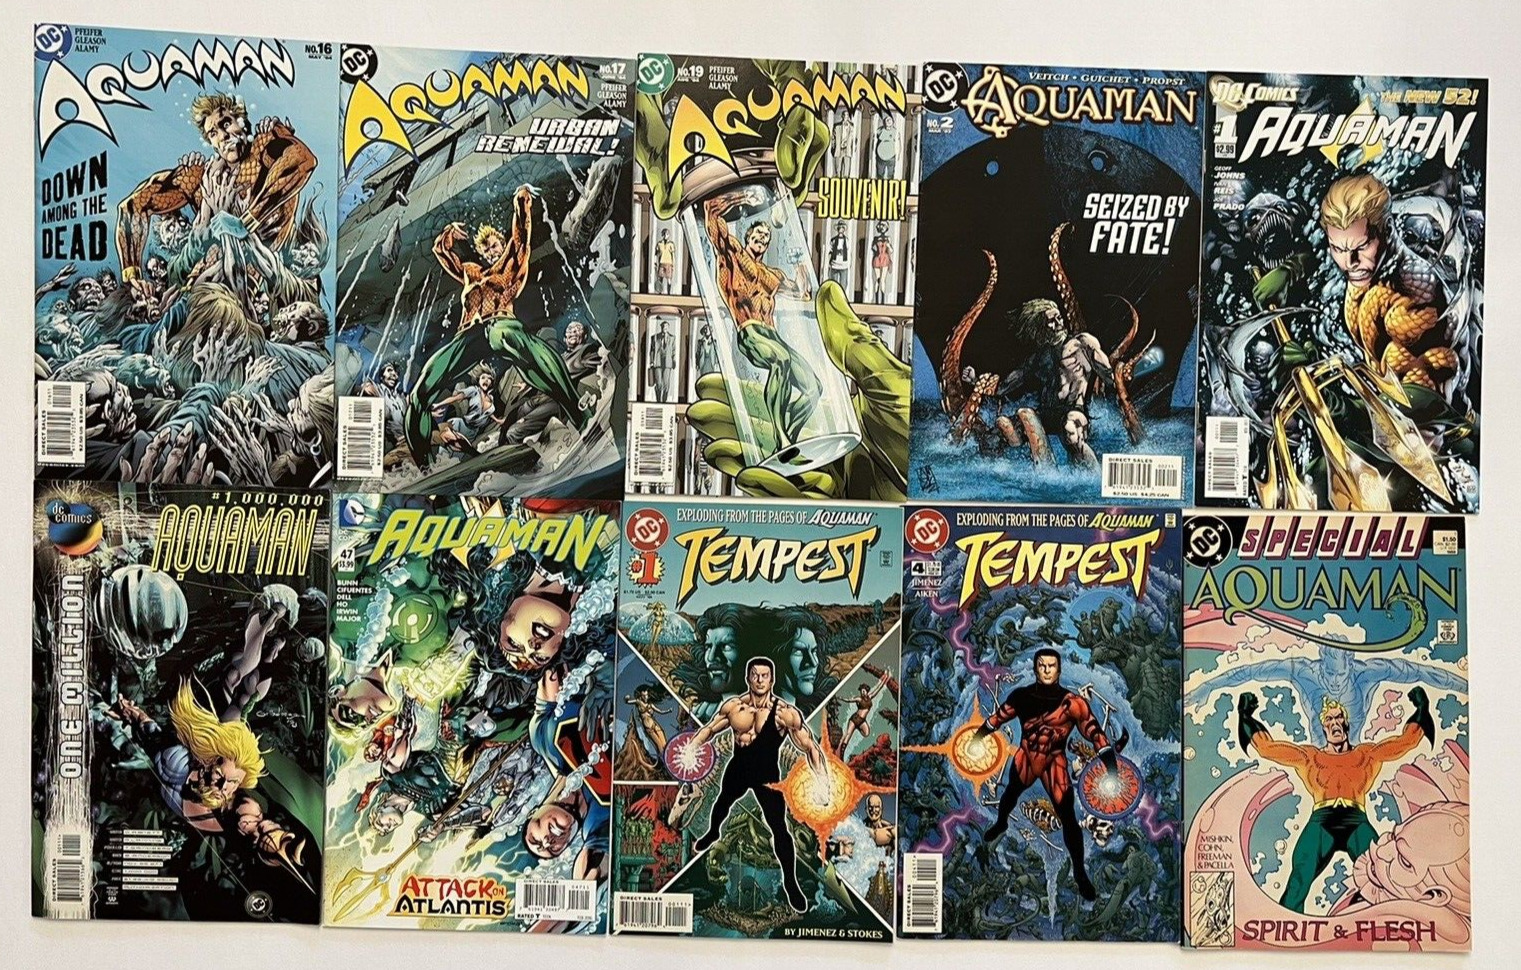 Aquaman Mixed Lot of 10 years ranging from 1988 - 2016 - incl Tempest - 1 Key